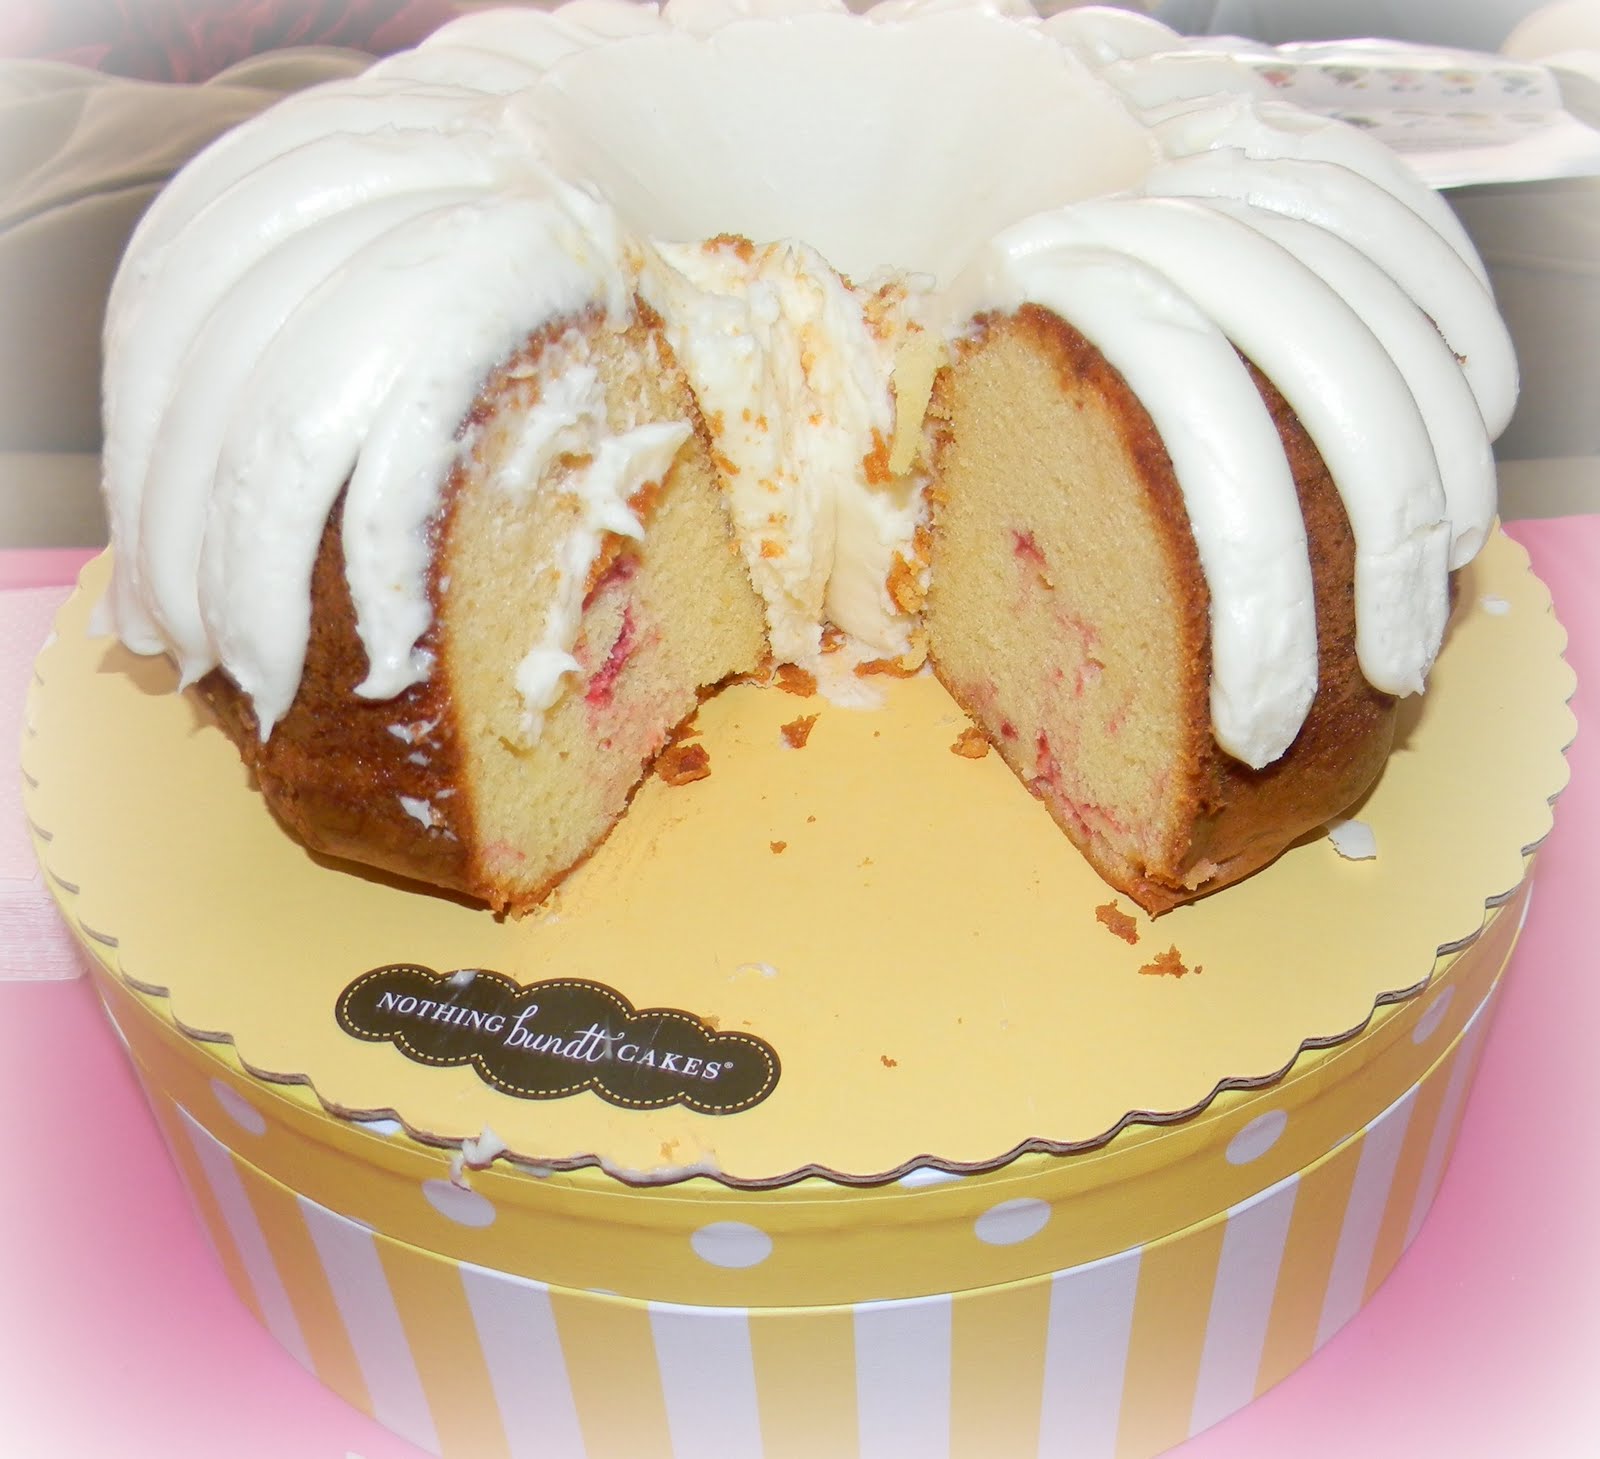 Life as I know it Nothing Bundt Cakes {Review}